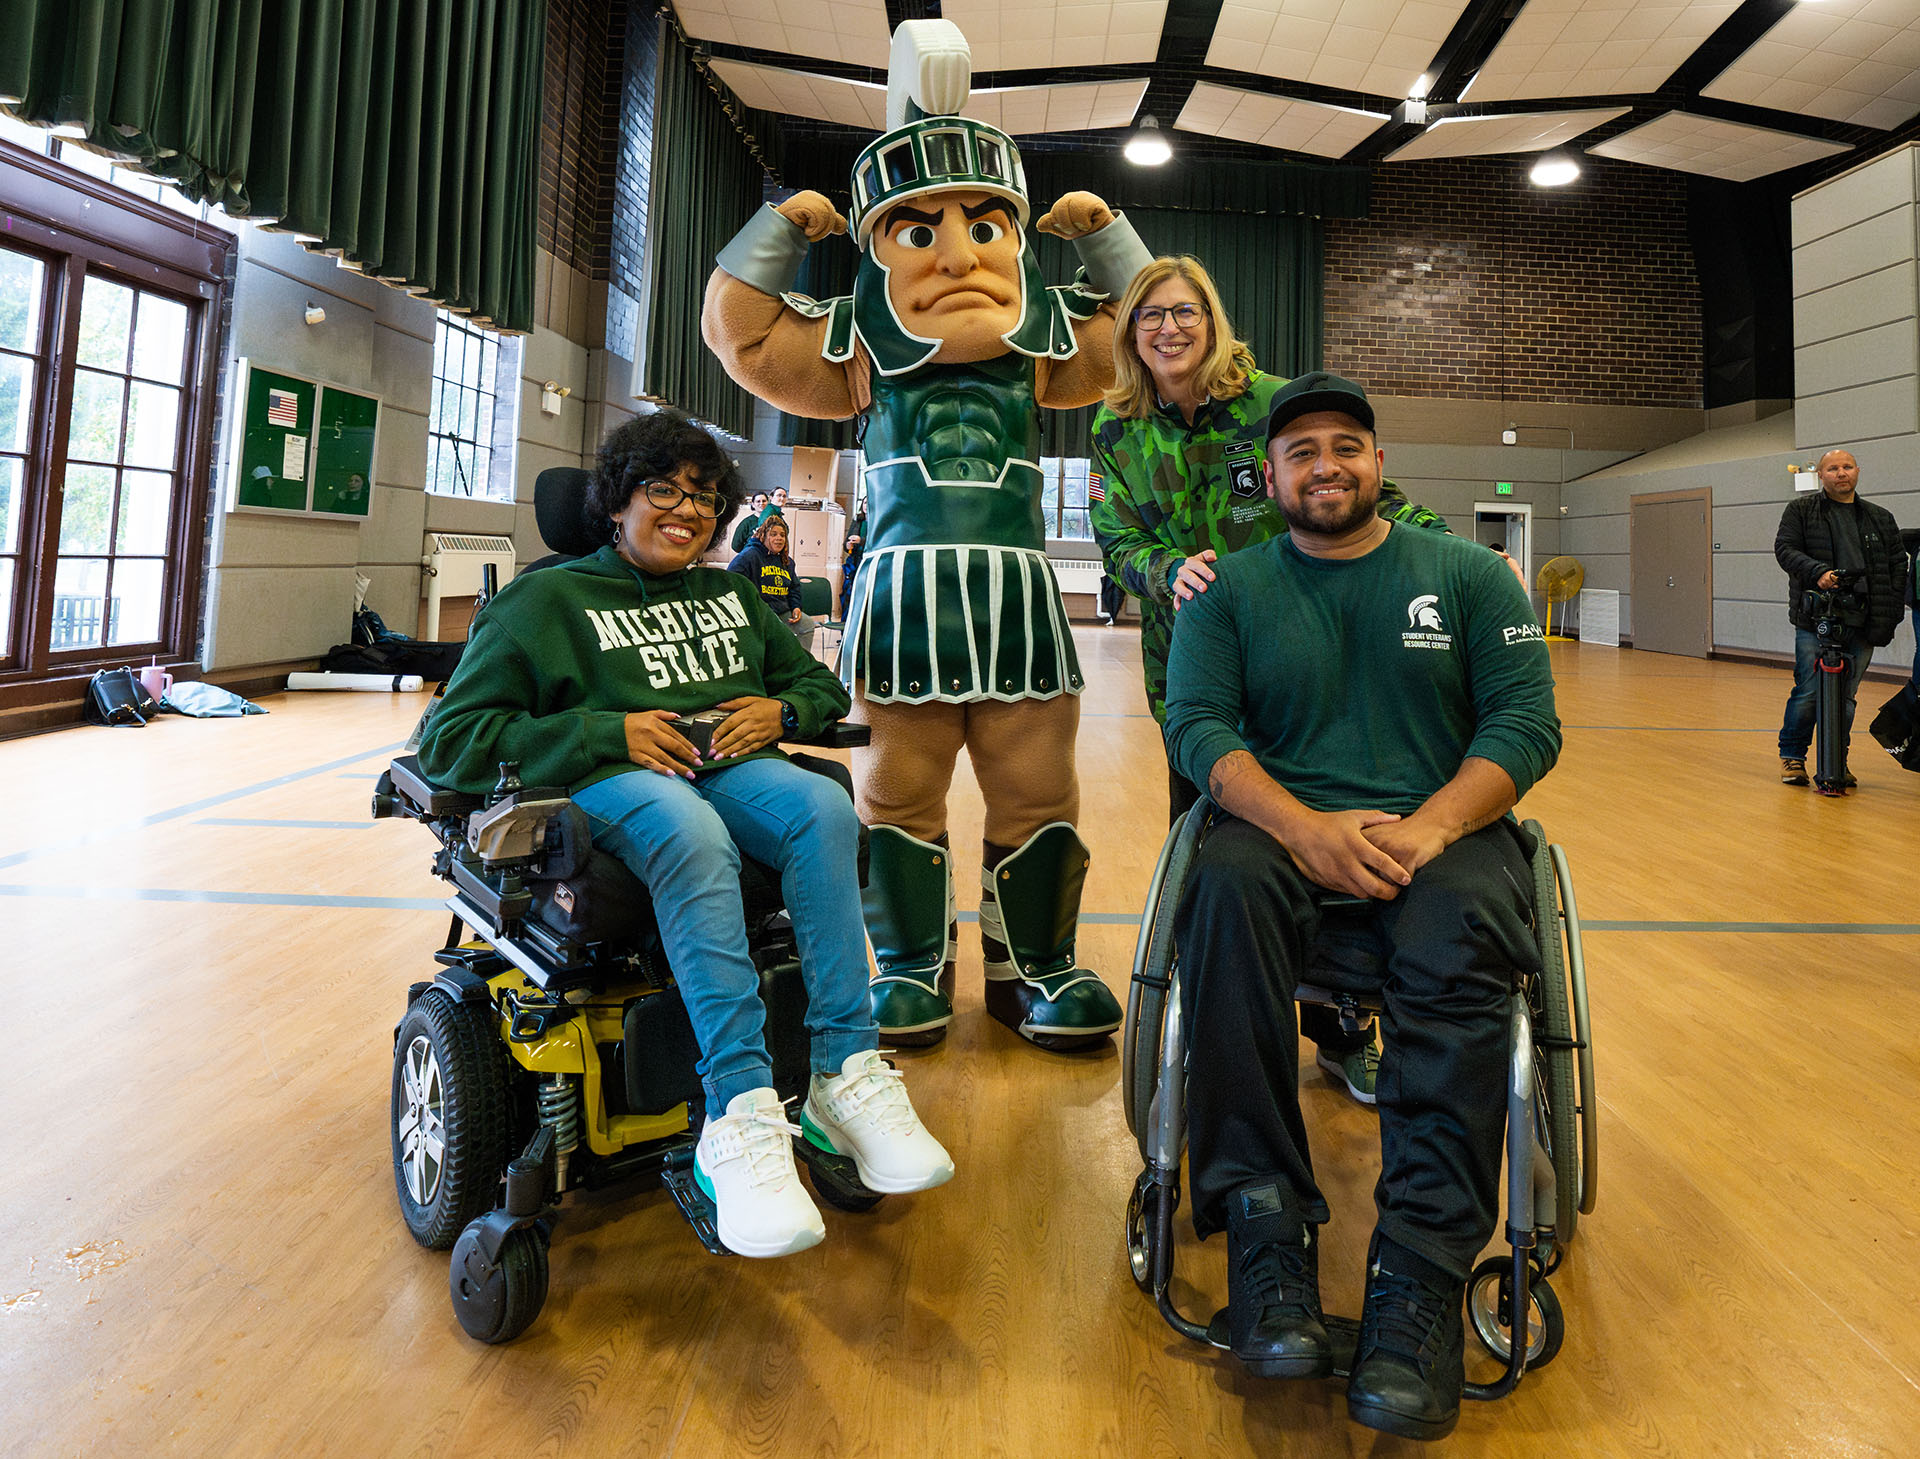 Sparty and interim president with two people in wheelchairs at the Alex's Great State Race welcome reception